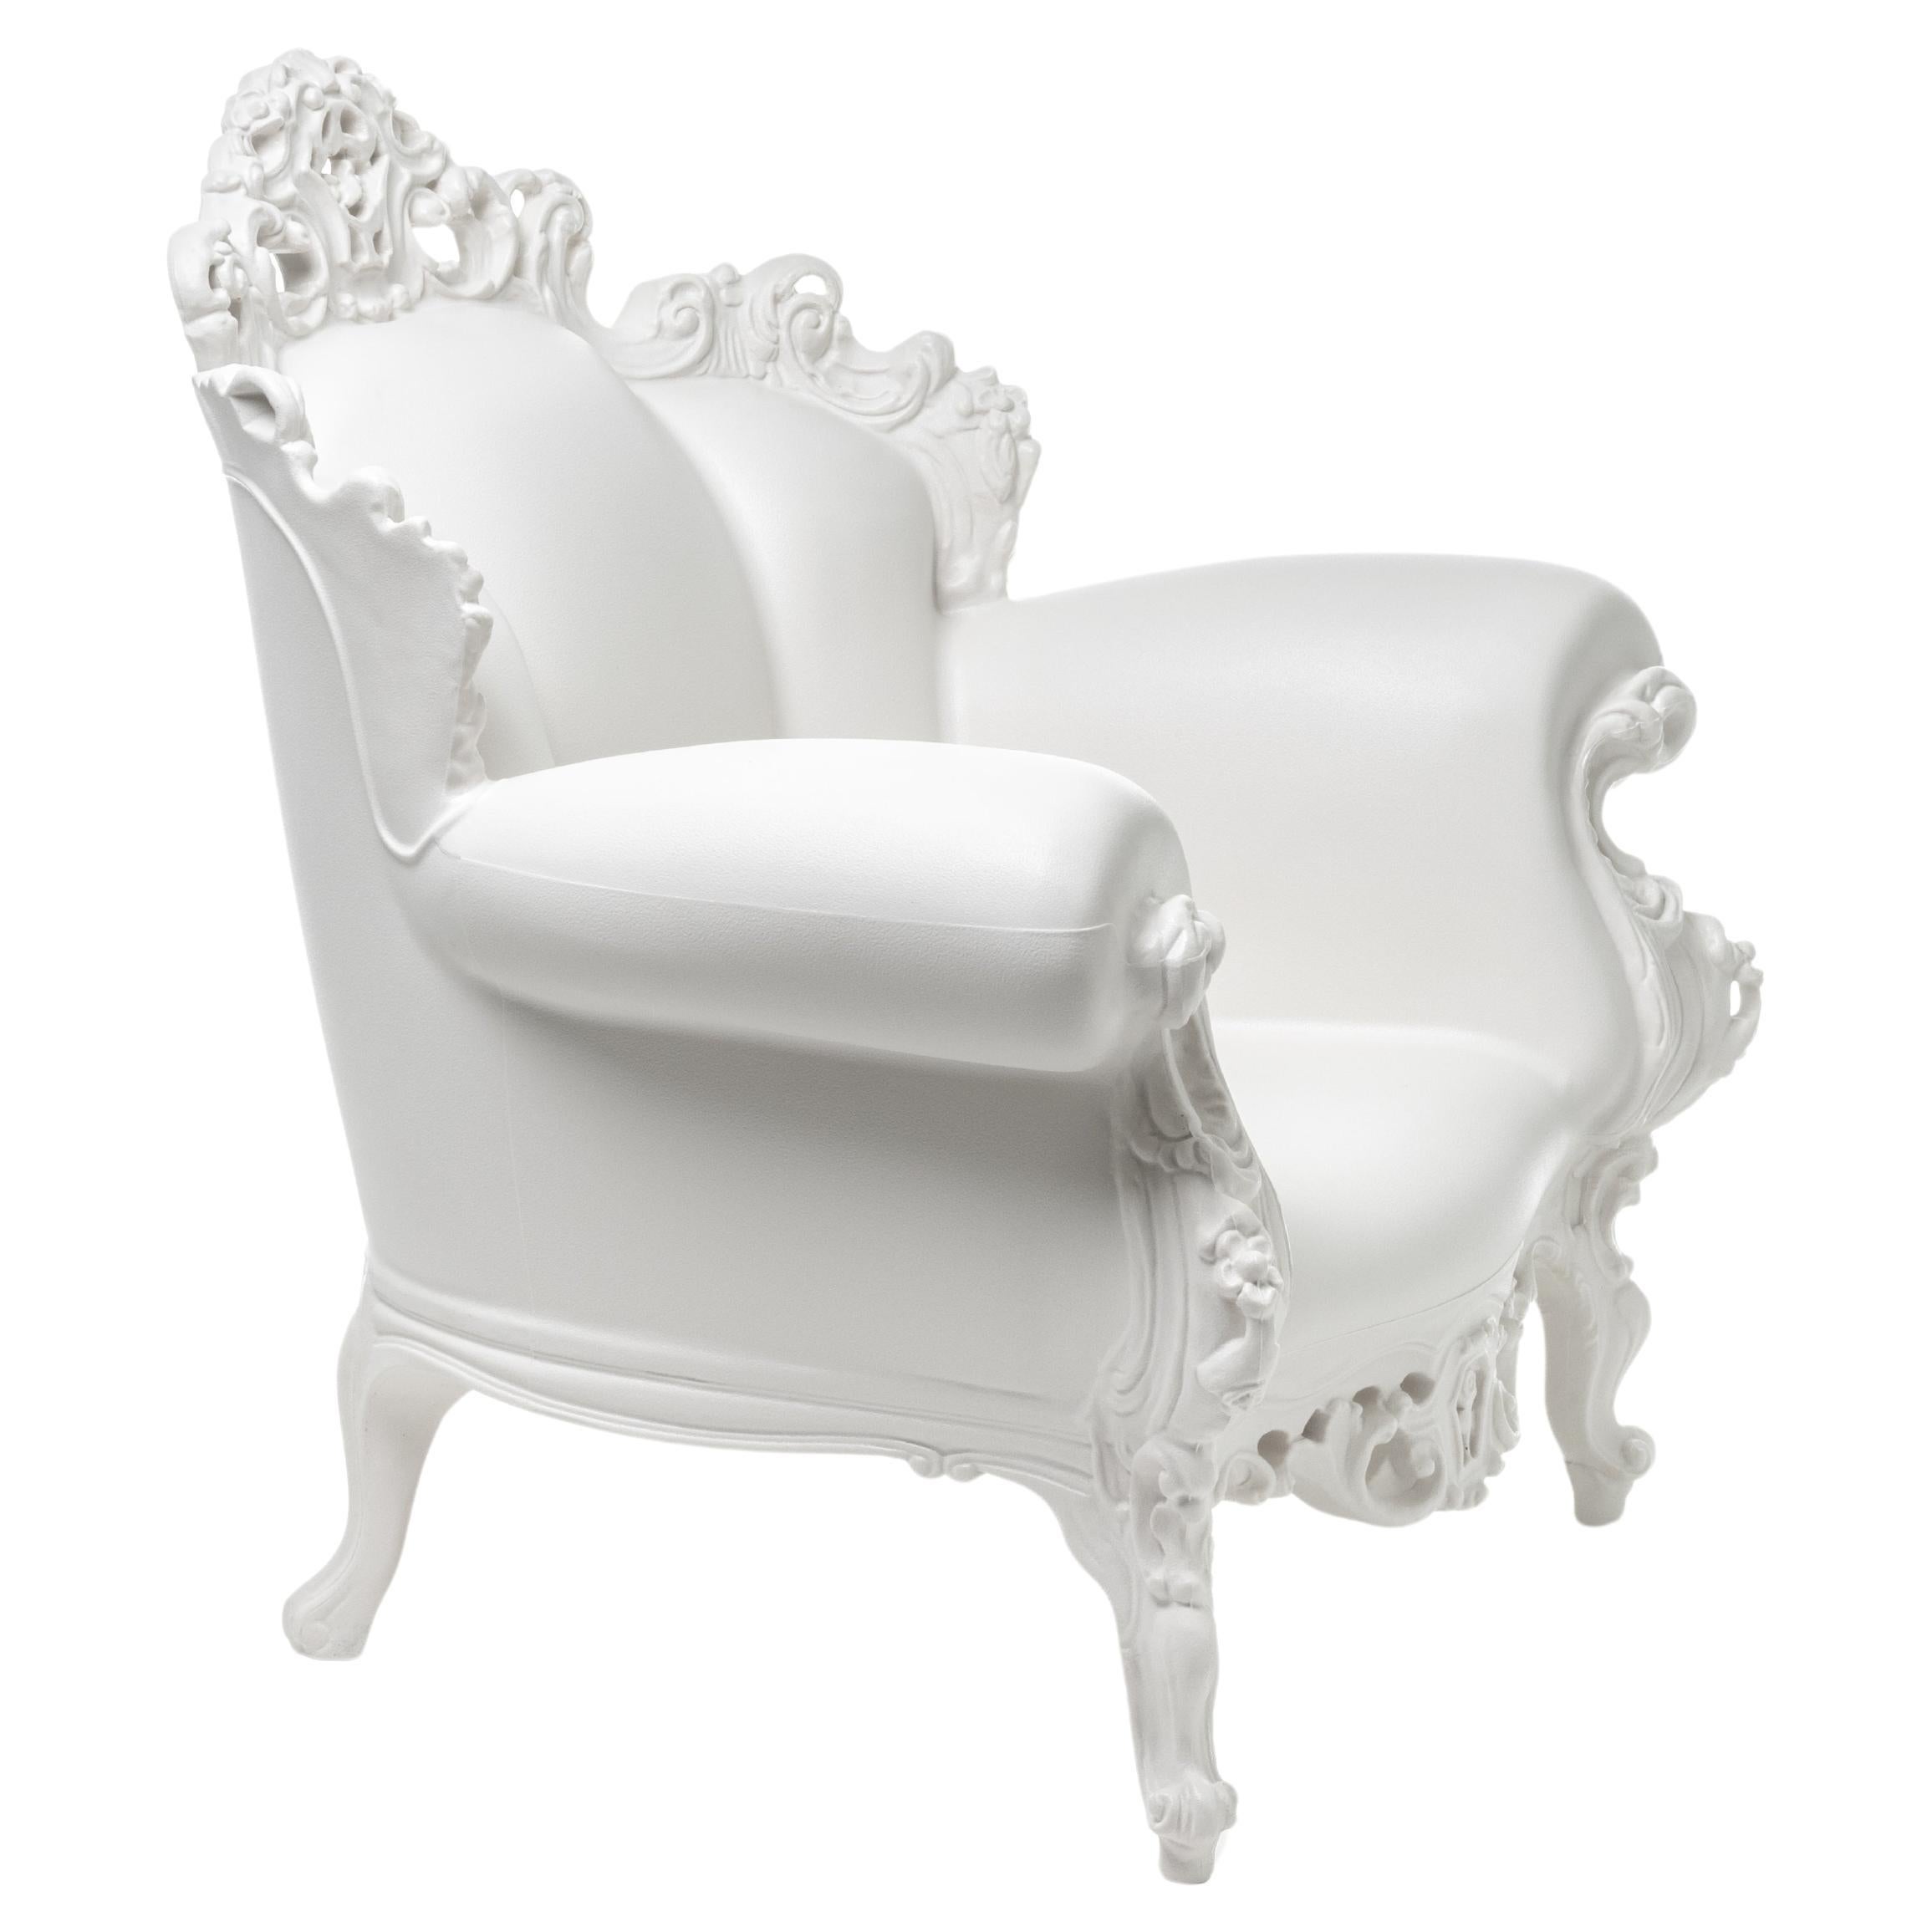 Polystyrene Magis Proust LowChair in Multicolour by Alessandro Mendini For Sale